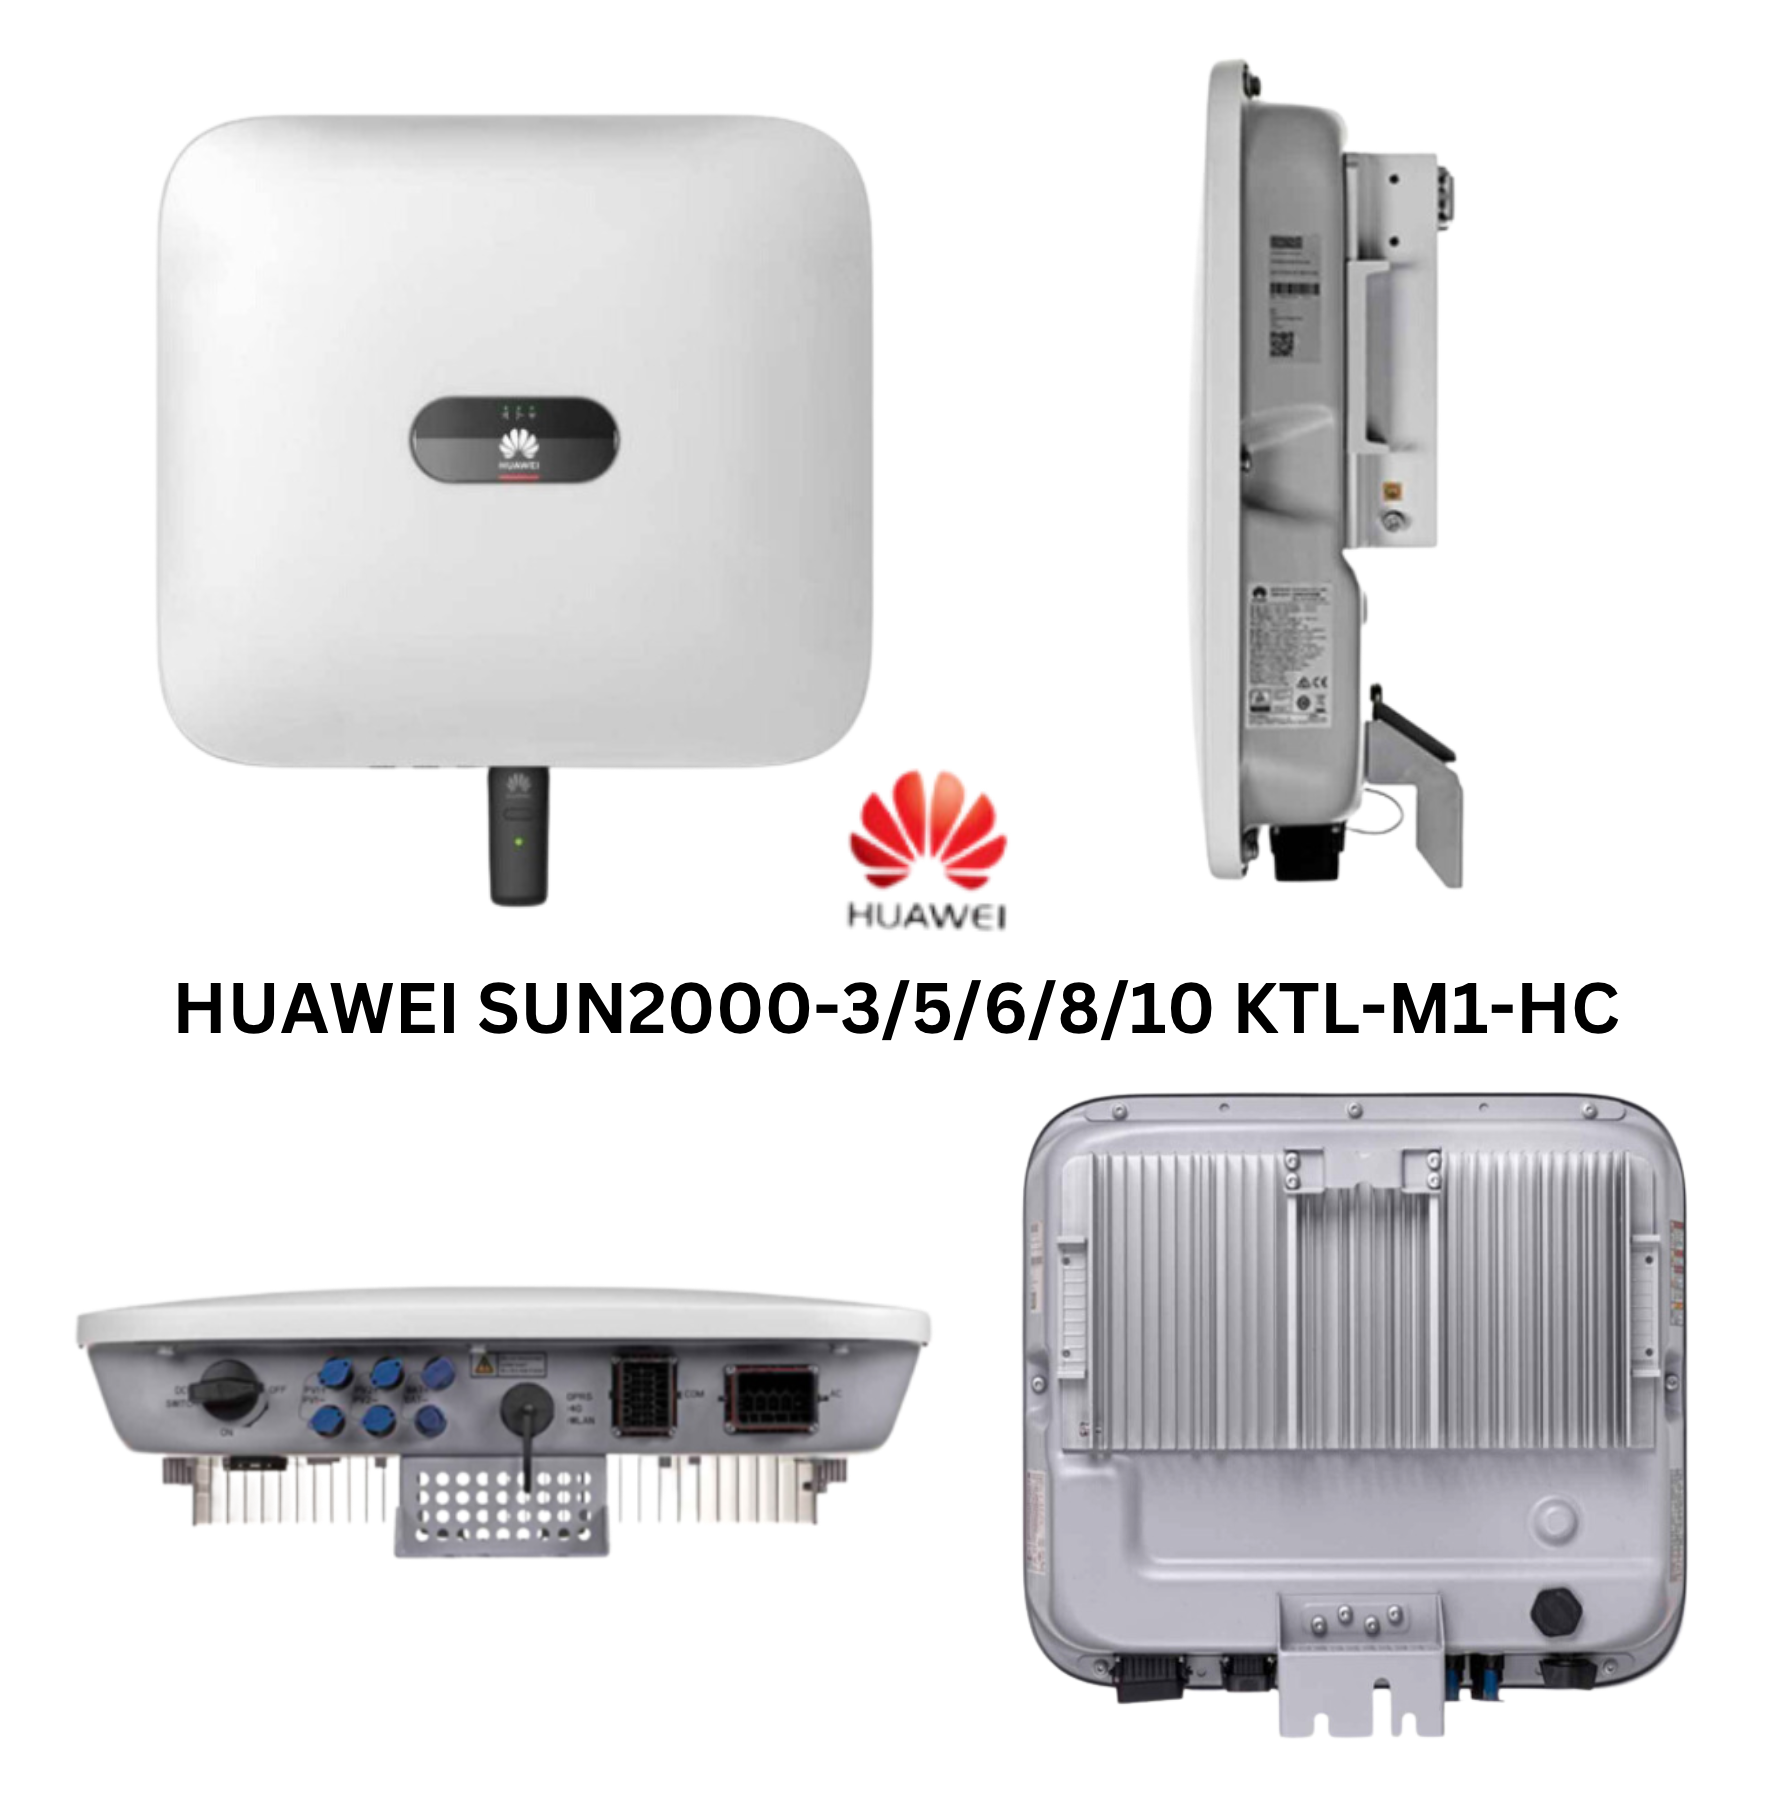 Huawei Ensemble Photovoltaïque Complet - [3kW + 10kWh]